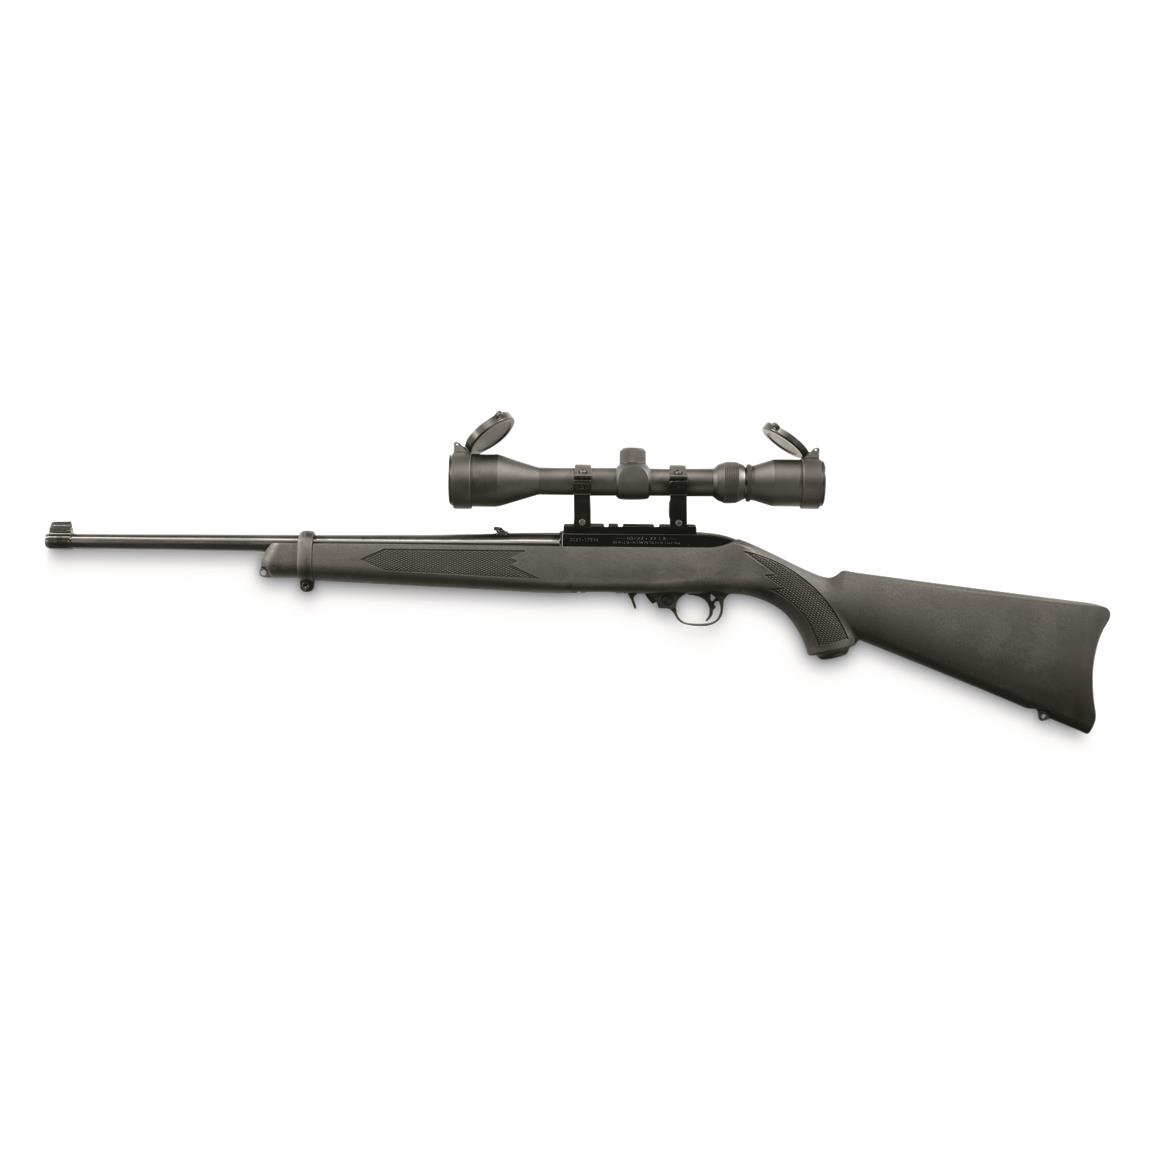 Ruger 10/22 Carbine, Semi-Automatic, .22LR, 18.5" BBL, 10+1 Rds., AimSports 3-9x40mm Scope